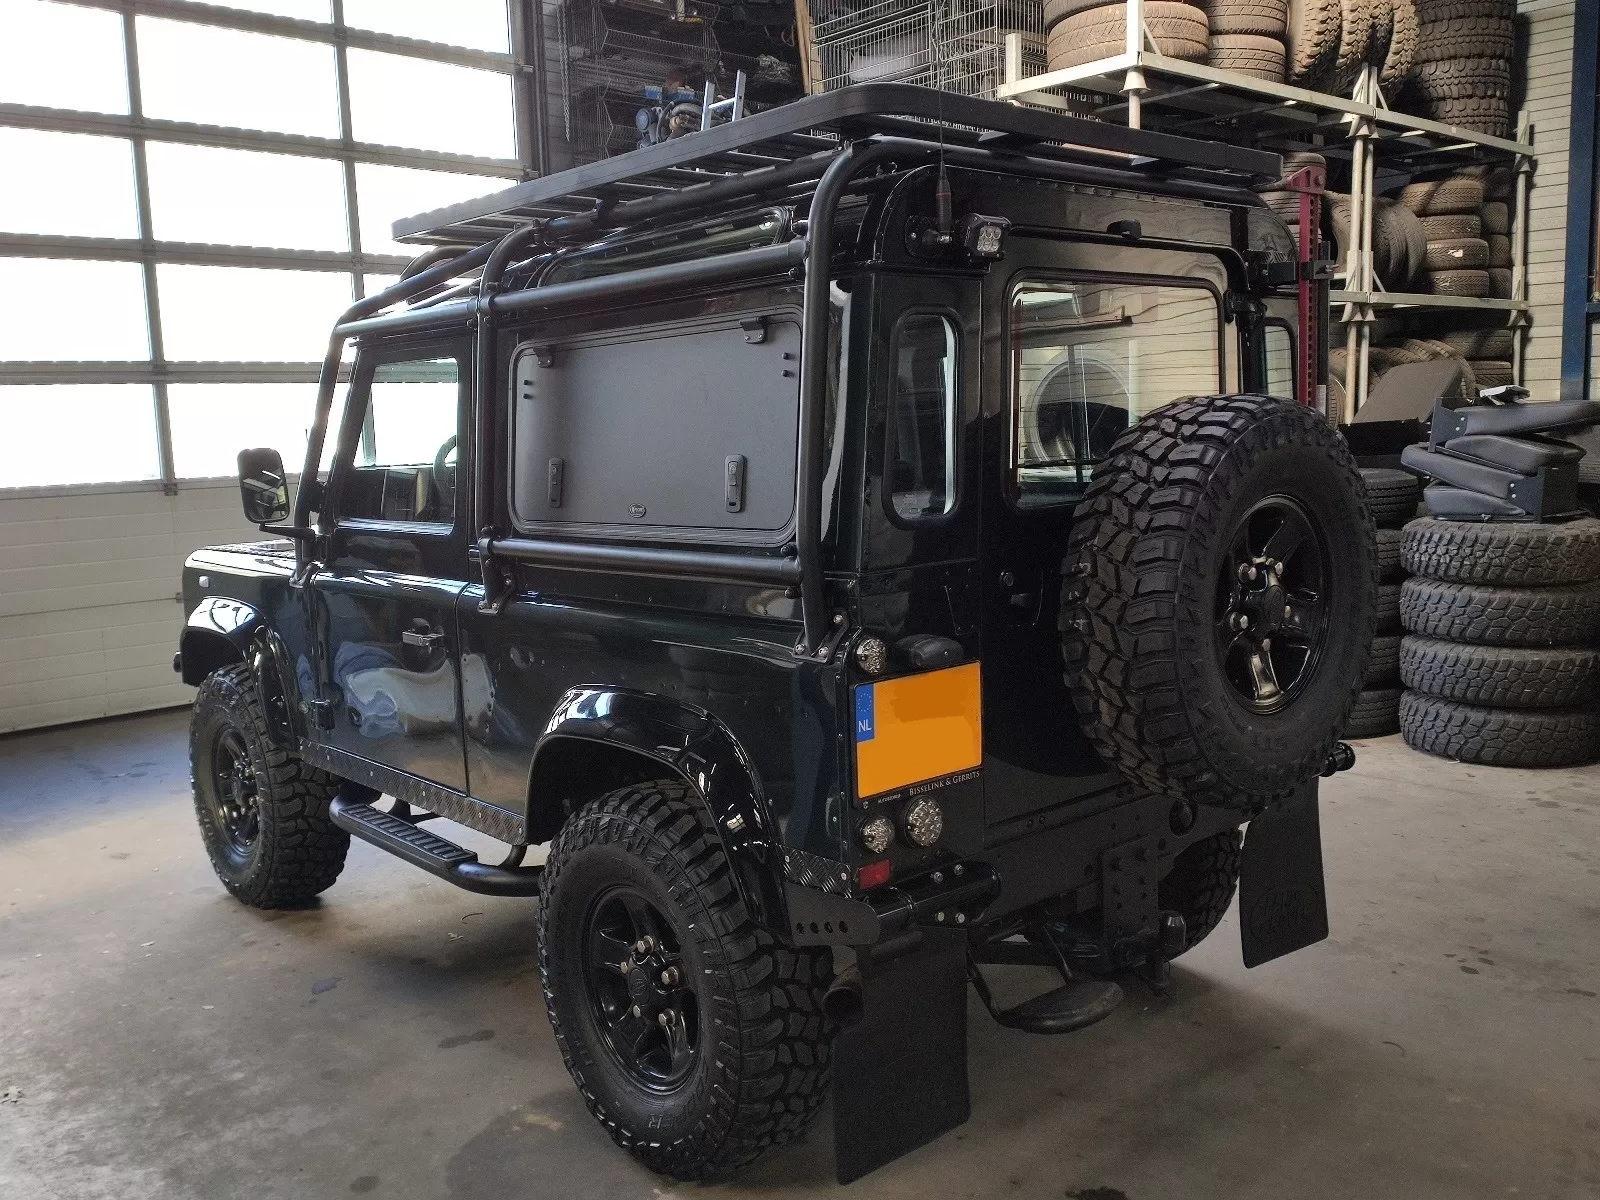 Closed Aluminium Gullwing Window by Explore Glazing on a Land Rover Defender.